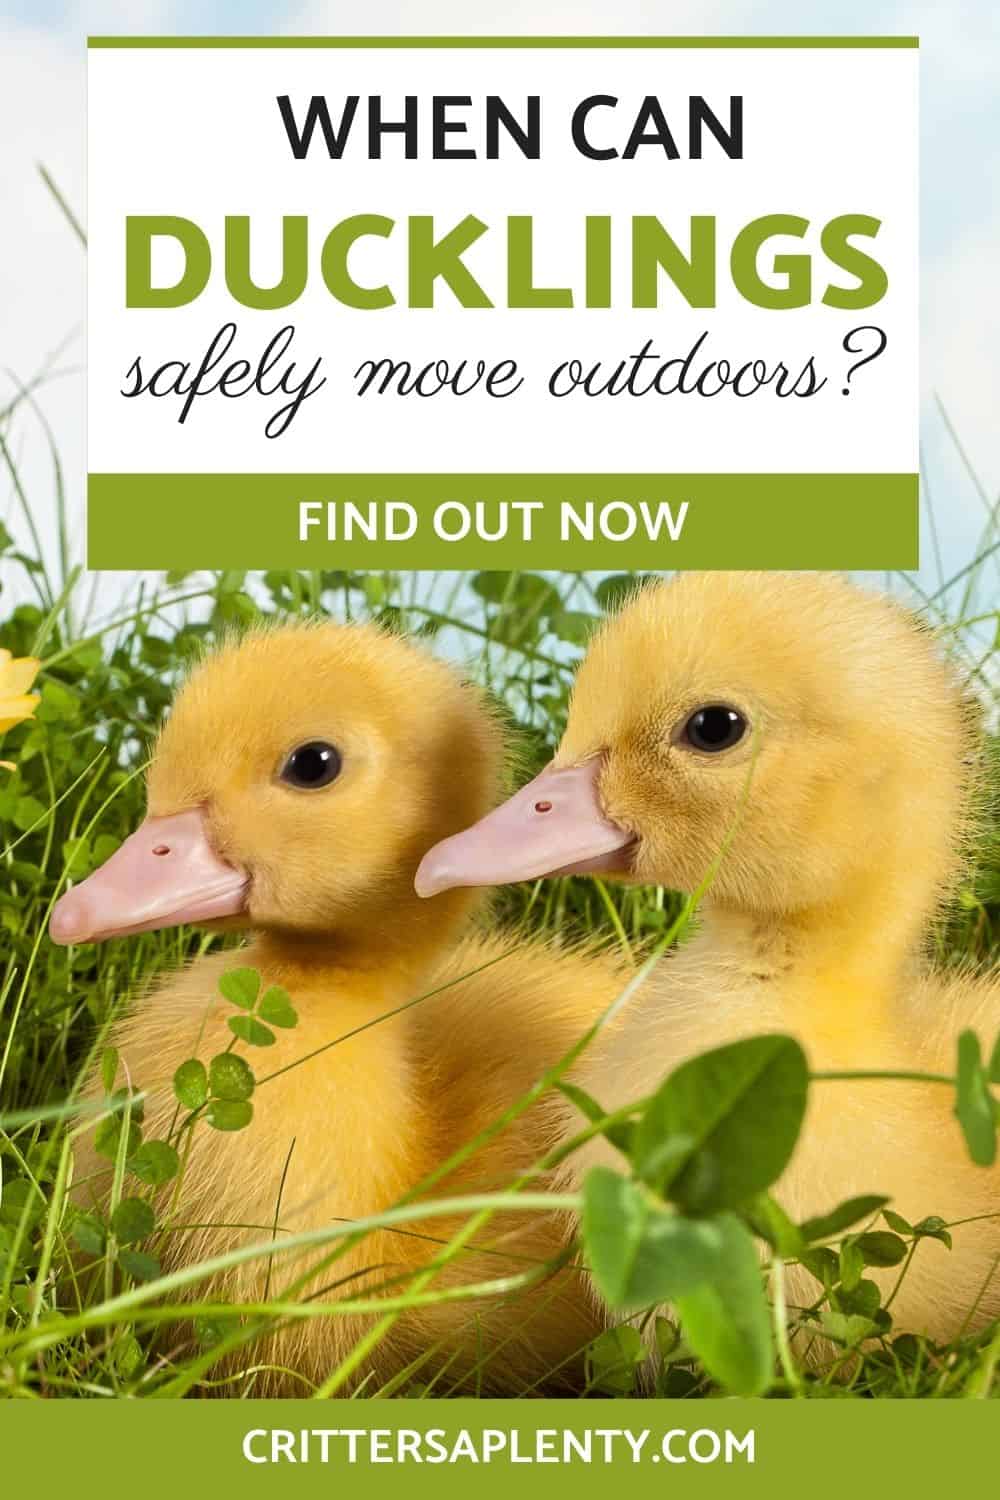 There is no denying that ducklings are the cutest little balls of fluff around come springtime, but they are also some of the messiest little critters! No matter how cute they are, you will be more than ready to move them outside when the time comes. However, you want to be careful to ensure that they are prepared and equipped to endure life outside of their safe, warm brooder. #duckcare #ducks #petcare via @crittersaplenty